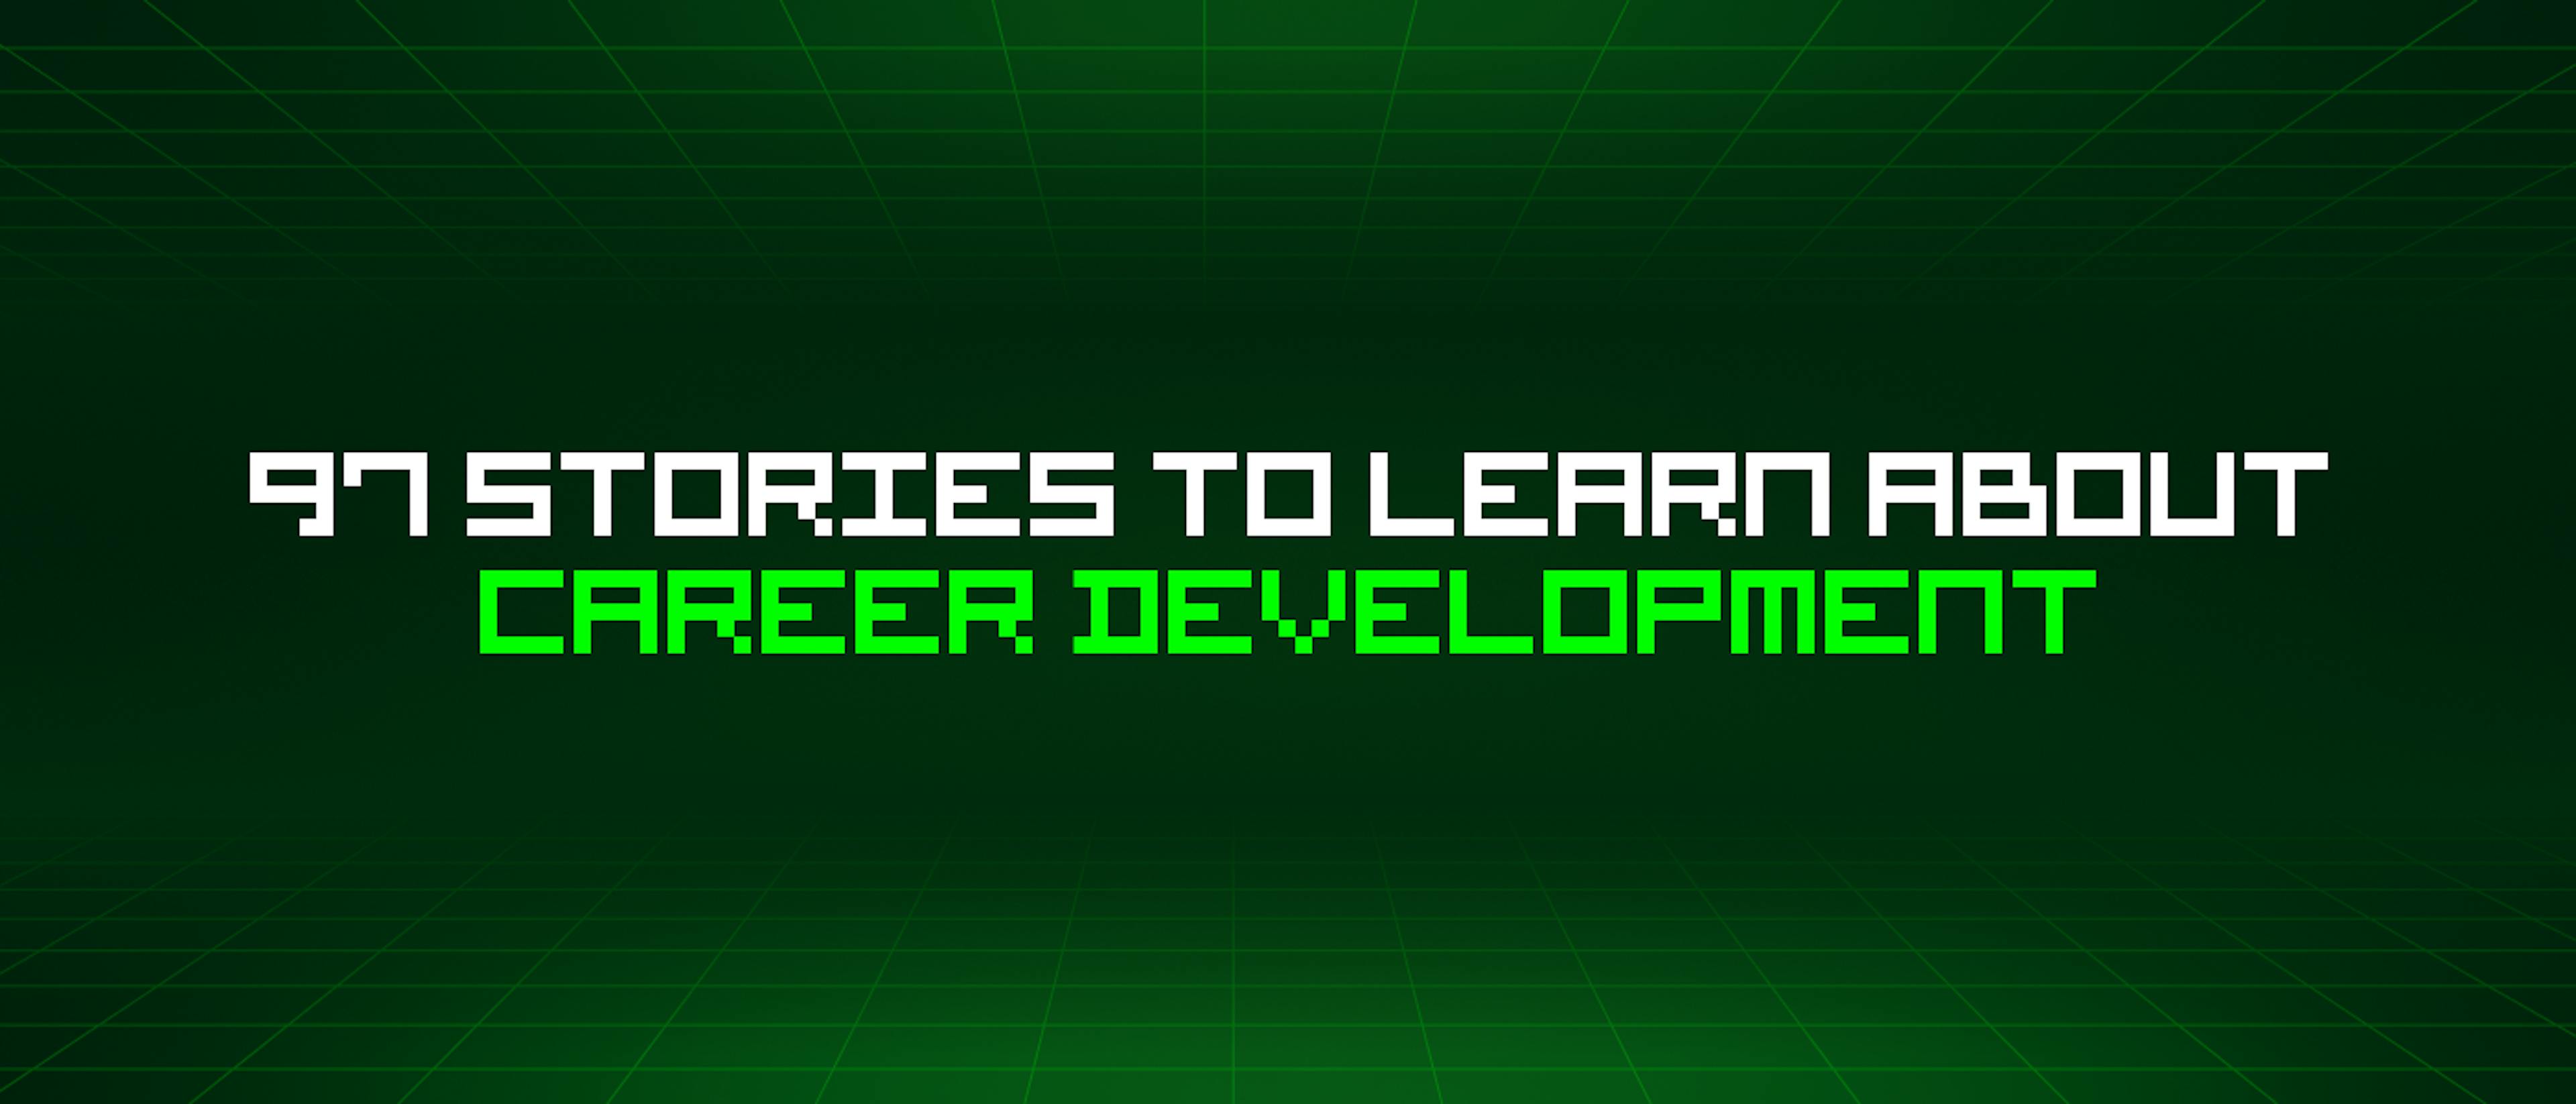 featured image - 97 Stories To Learn About Career Development